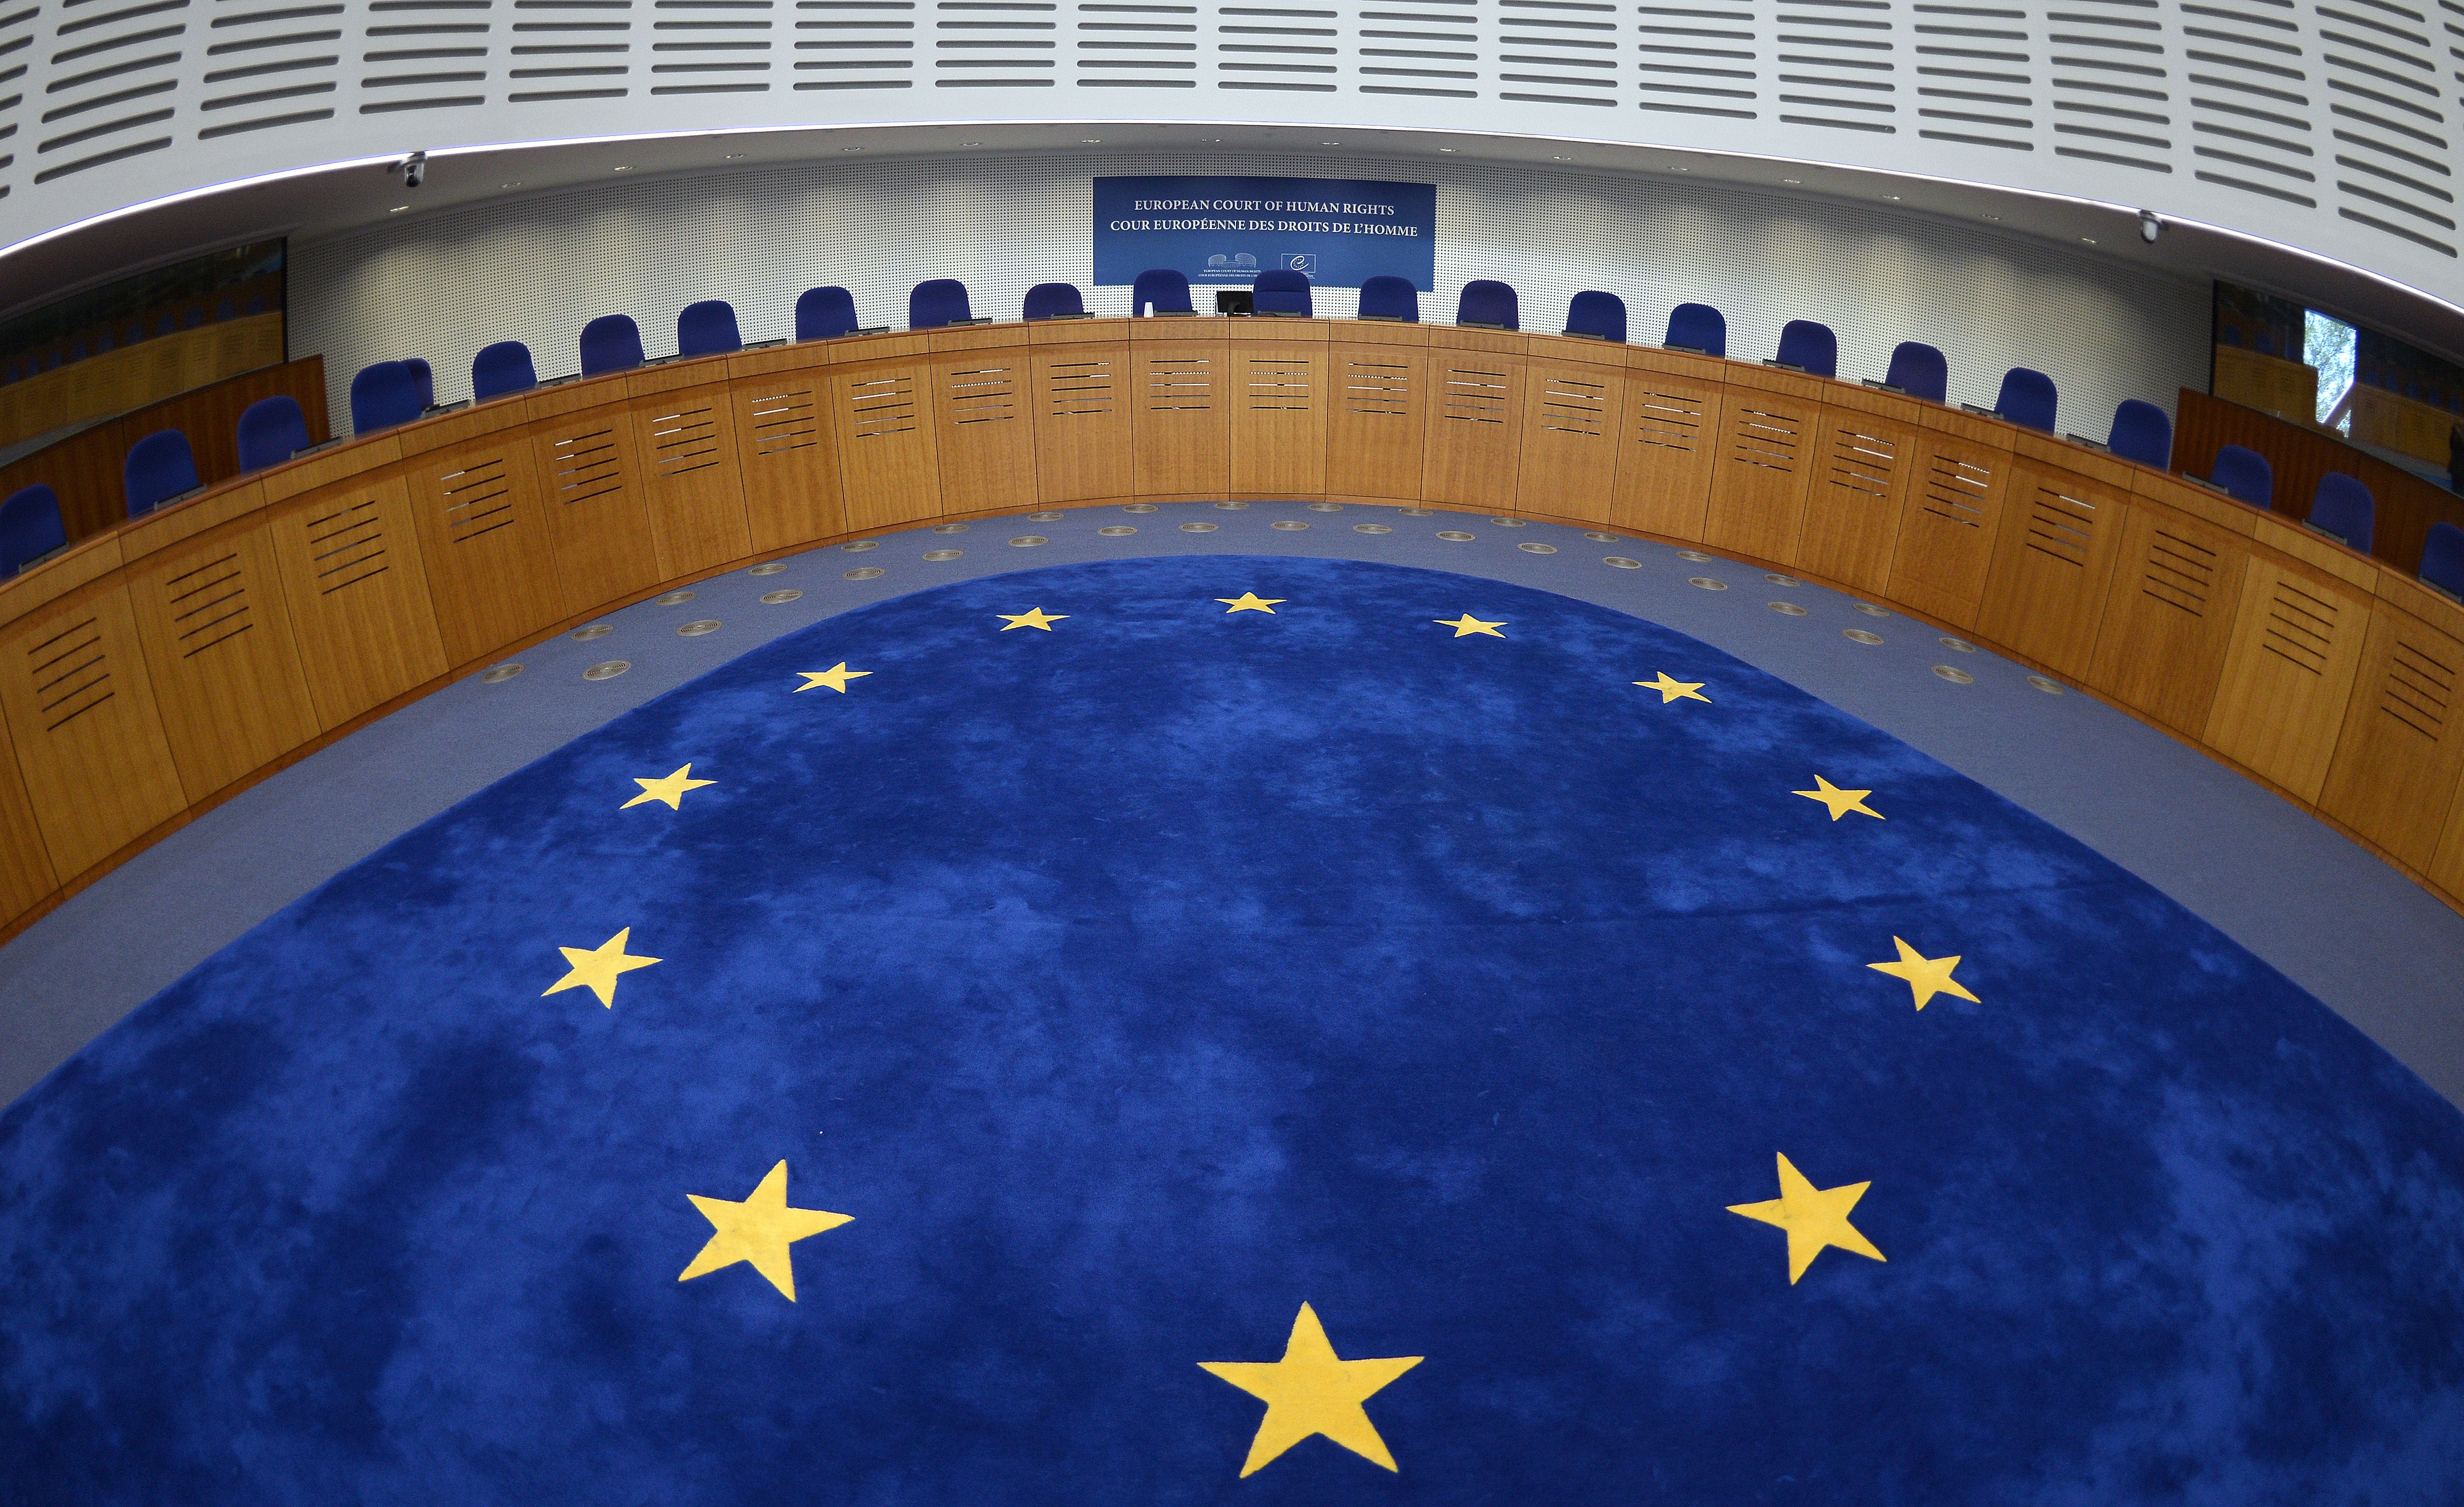 The audience room of the European Court for Human Rights